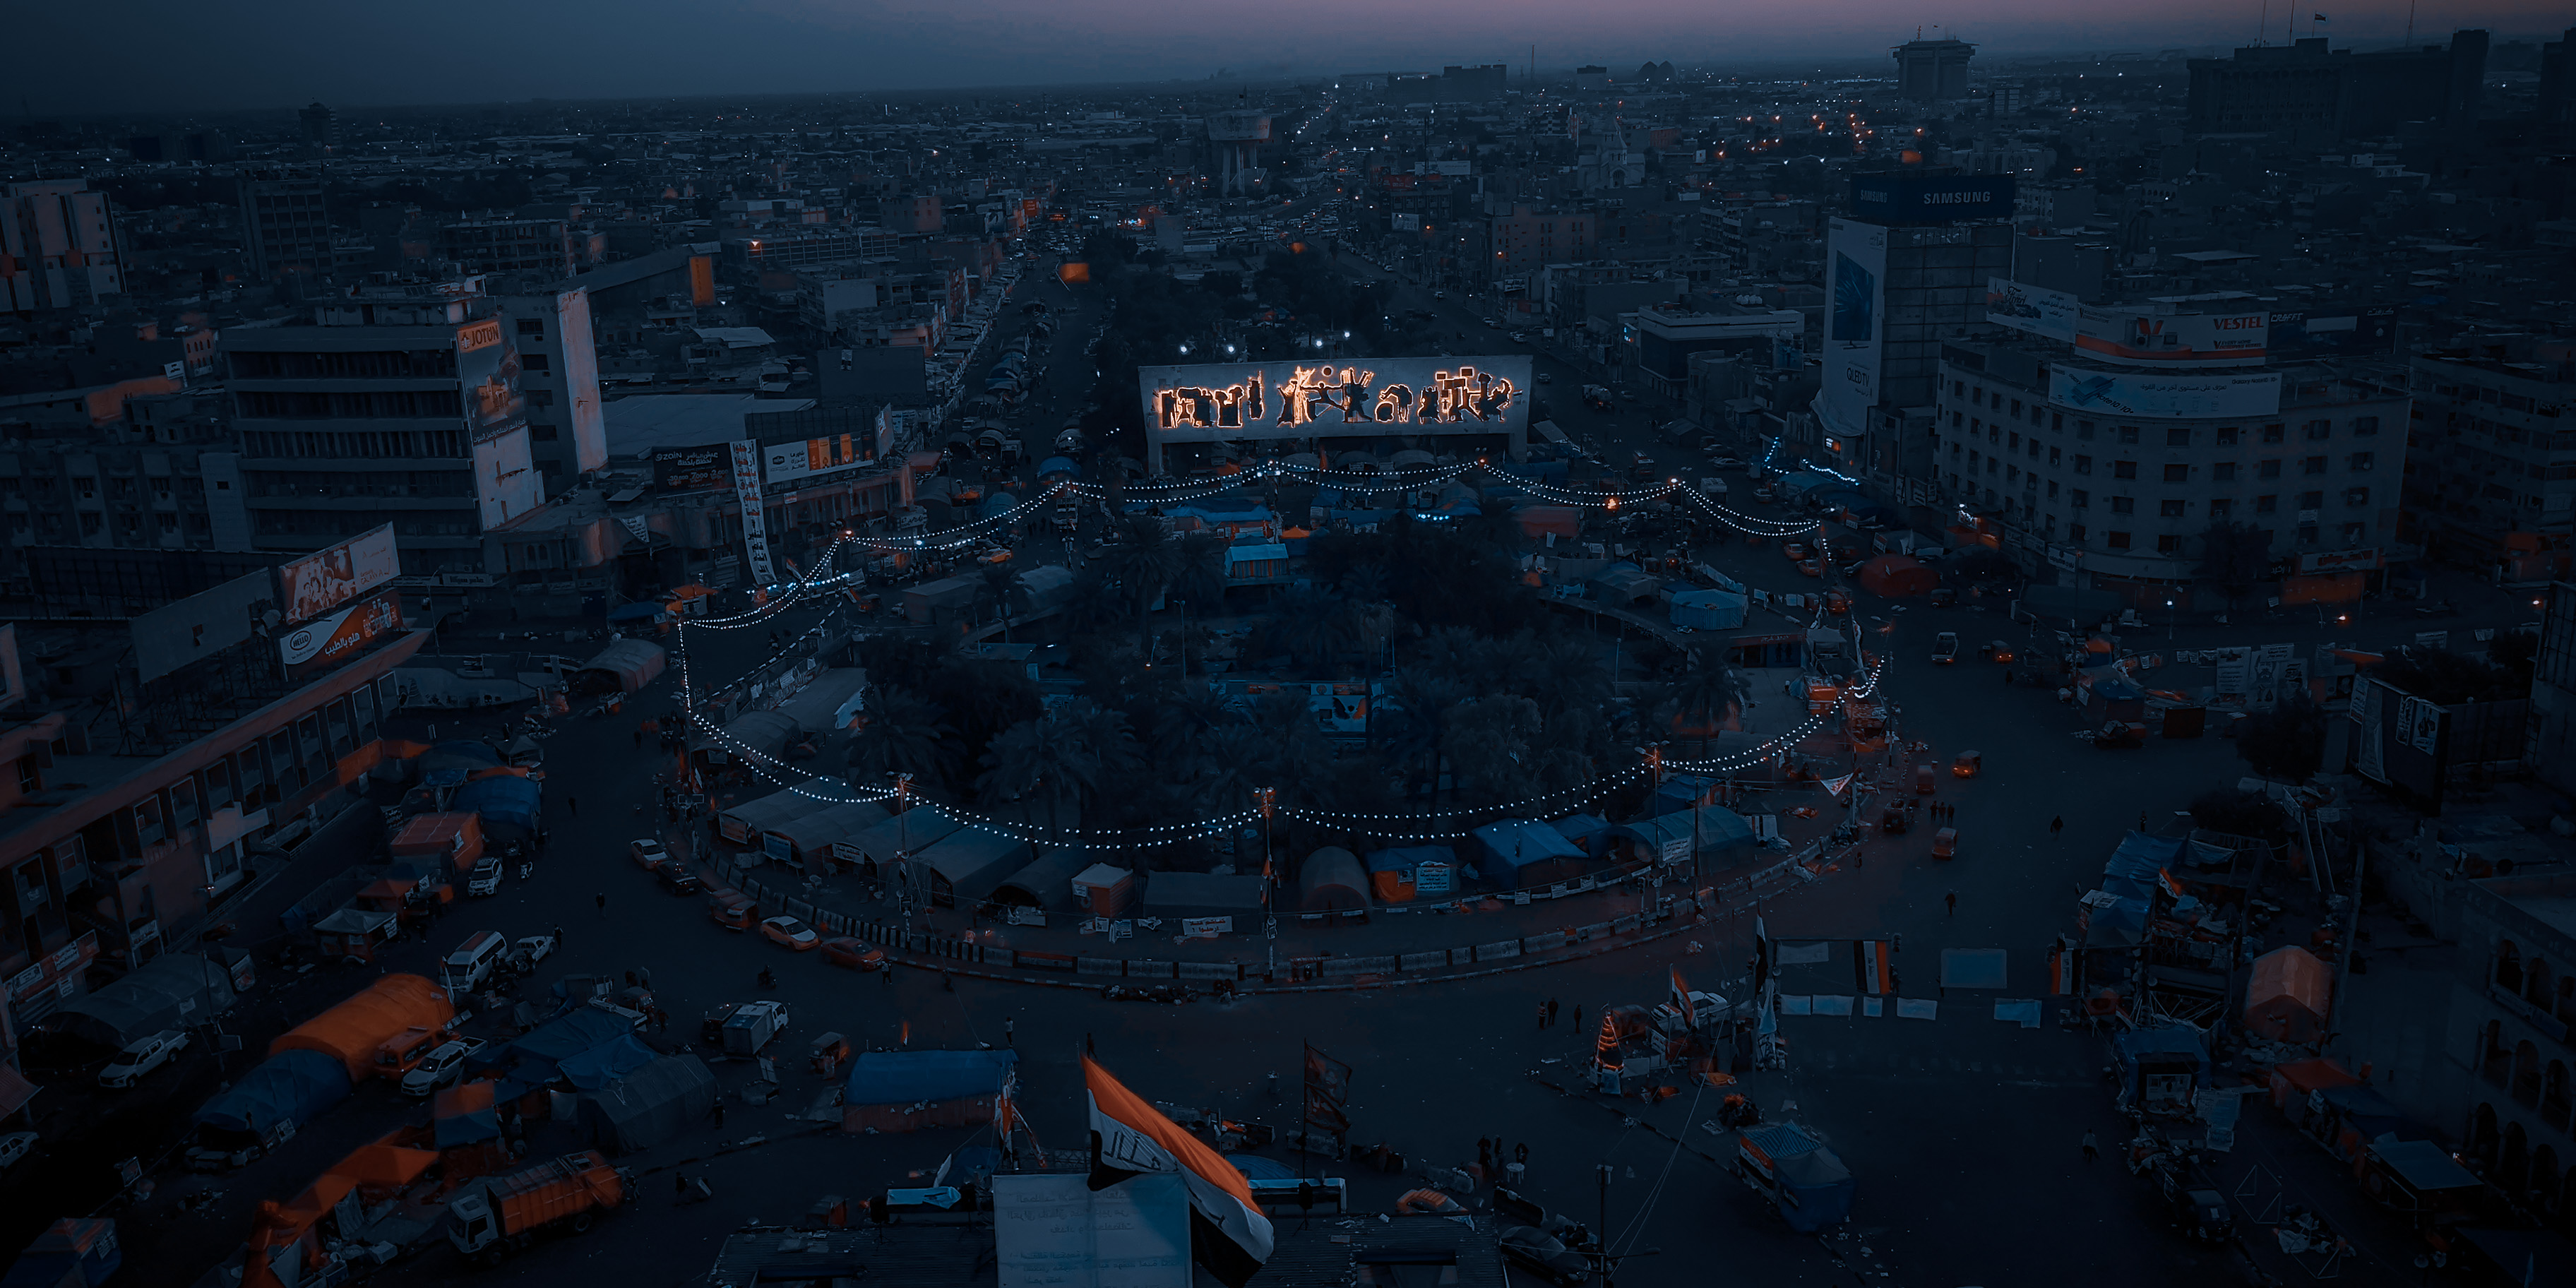 Al Tahrir Square early in the morning